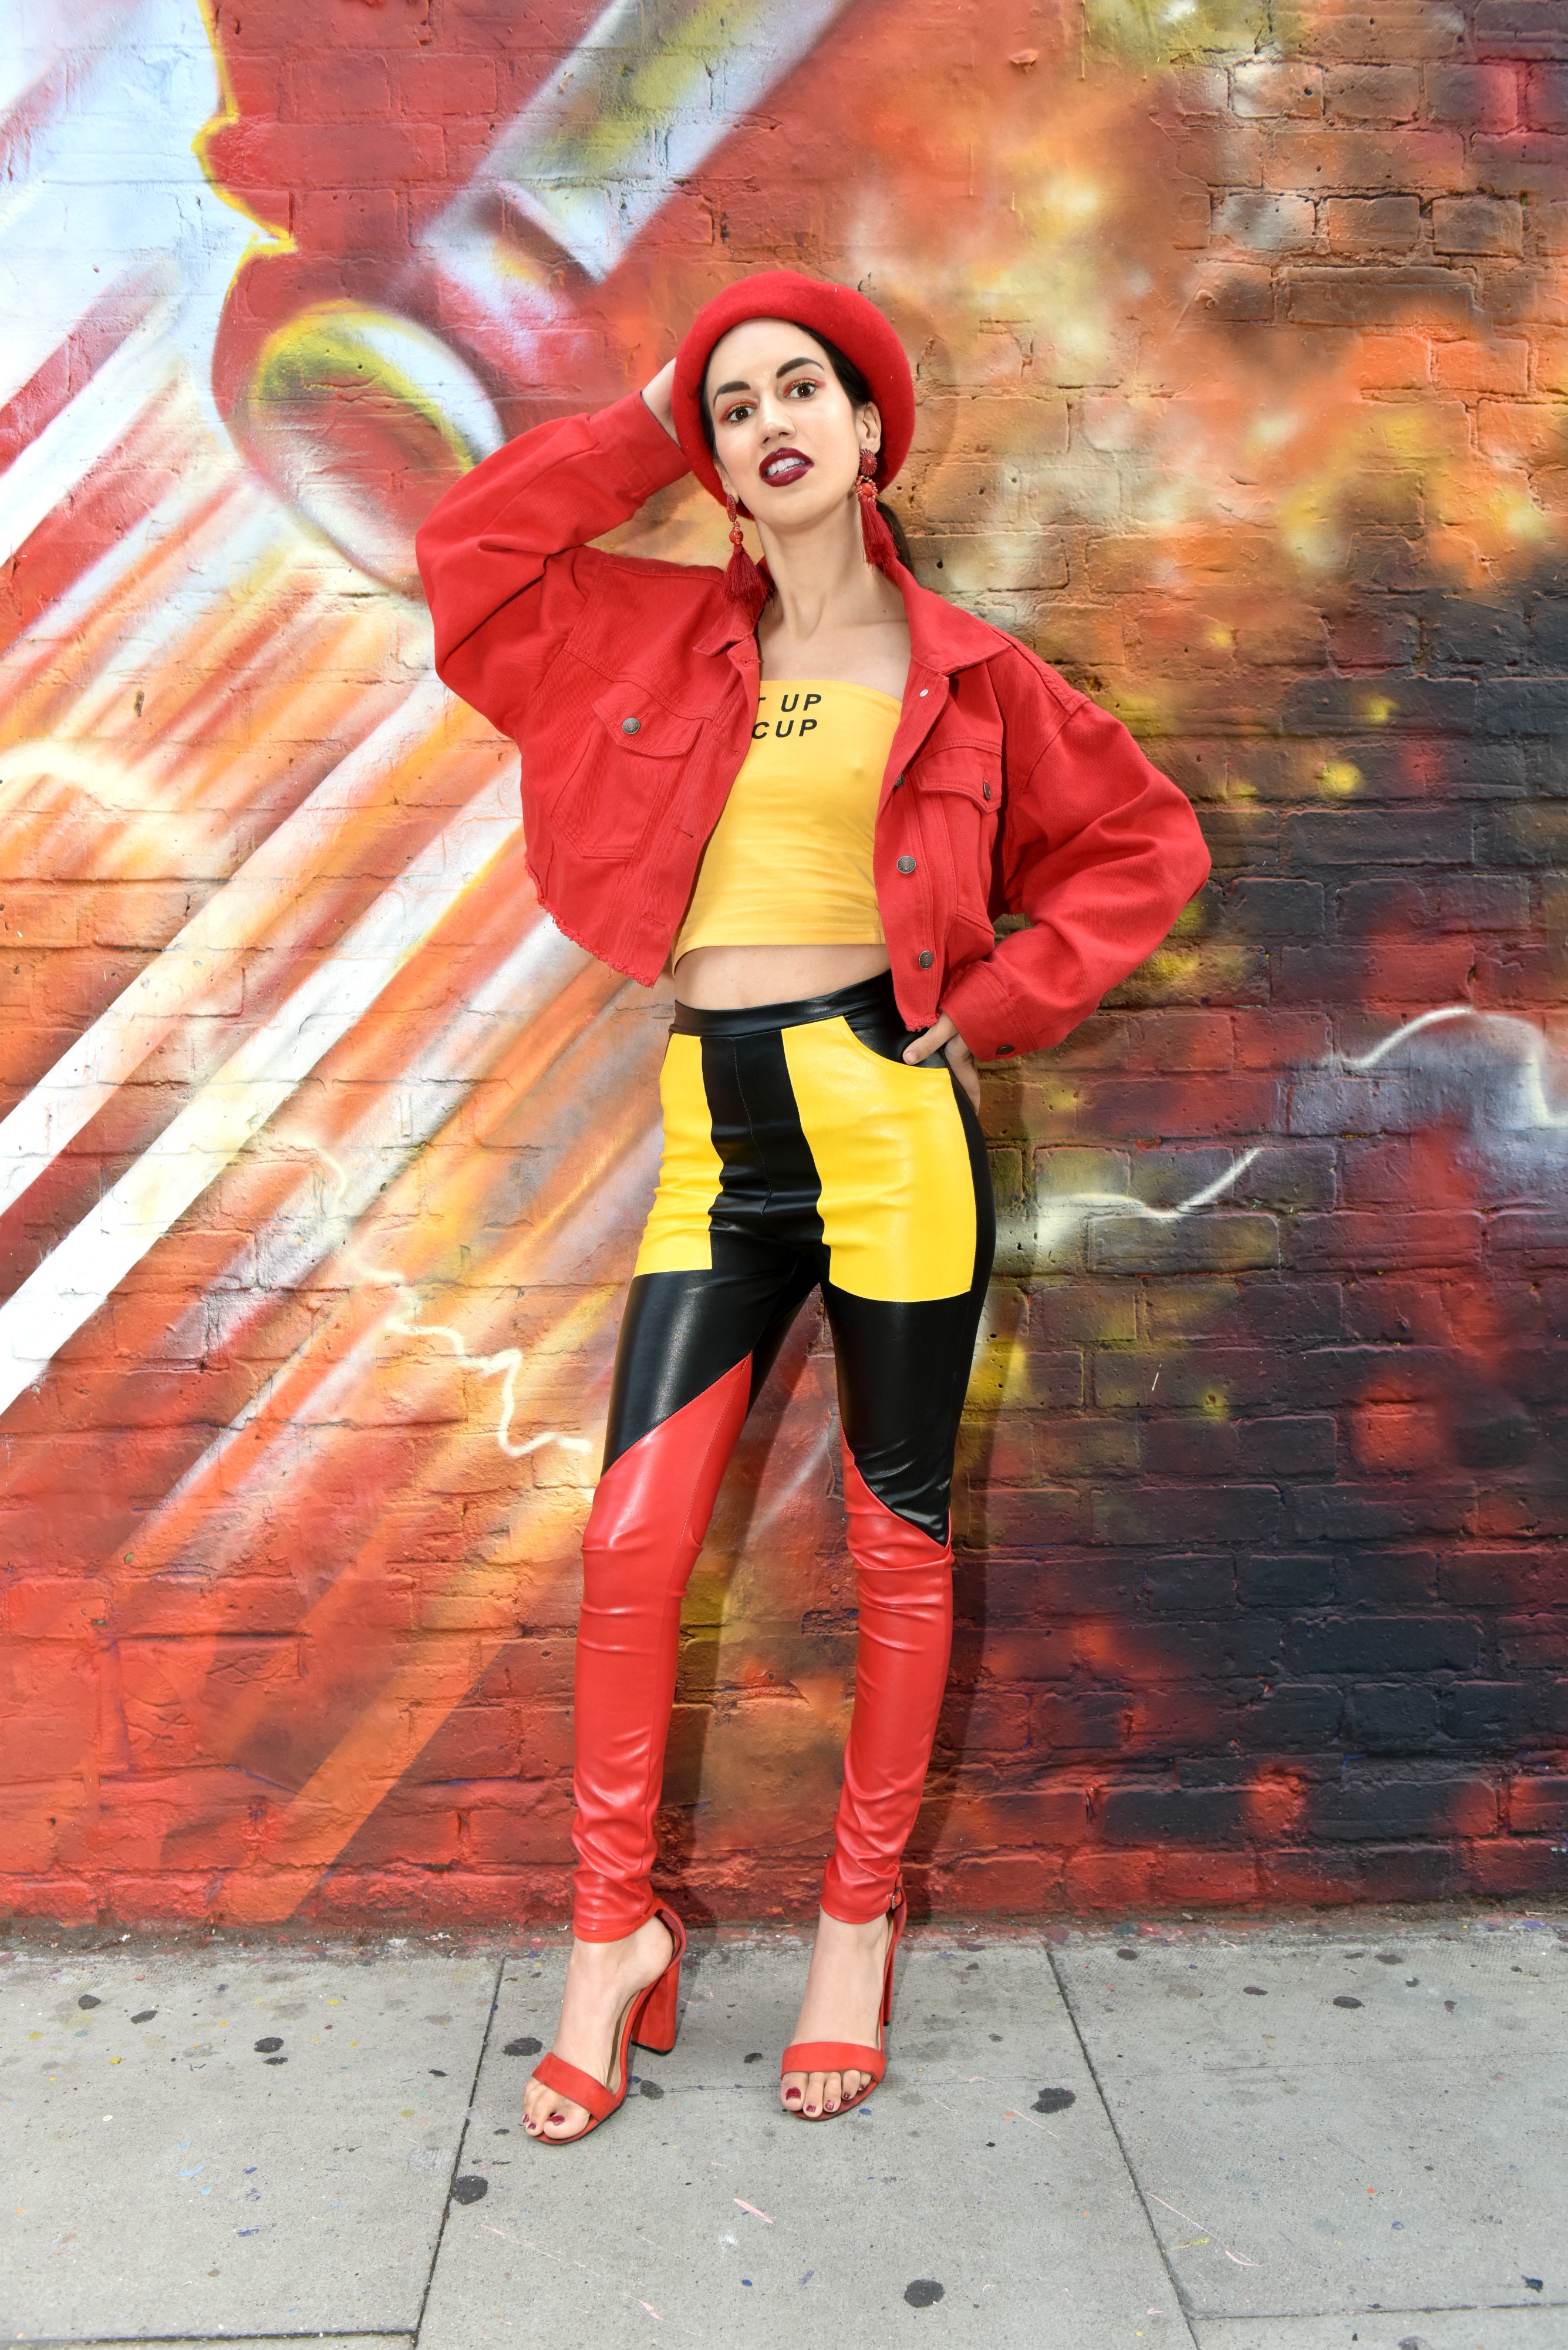  <img src="ana.jpg" alt="ana yellow and red outfit save time in the big city"/> 